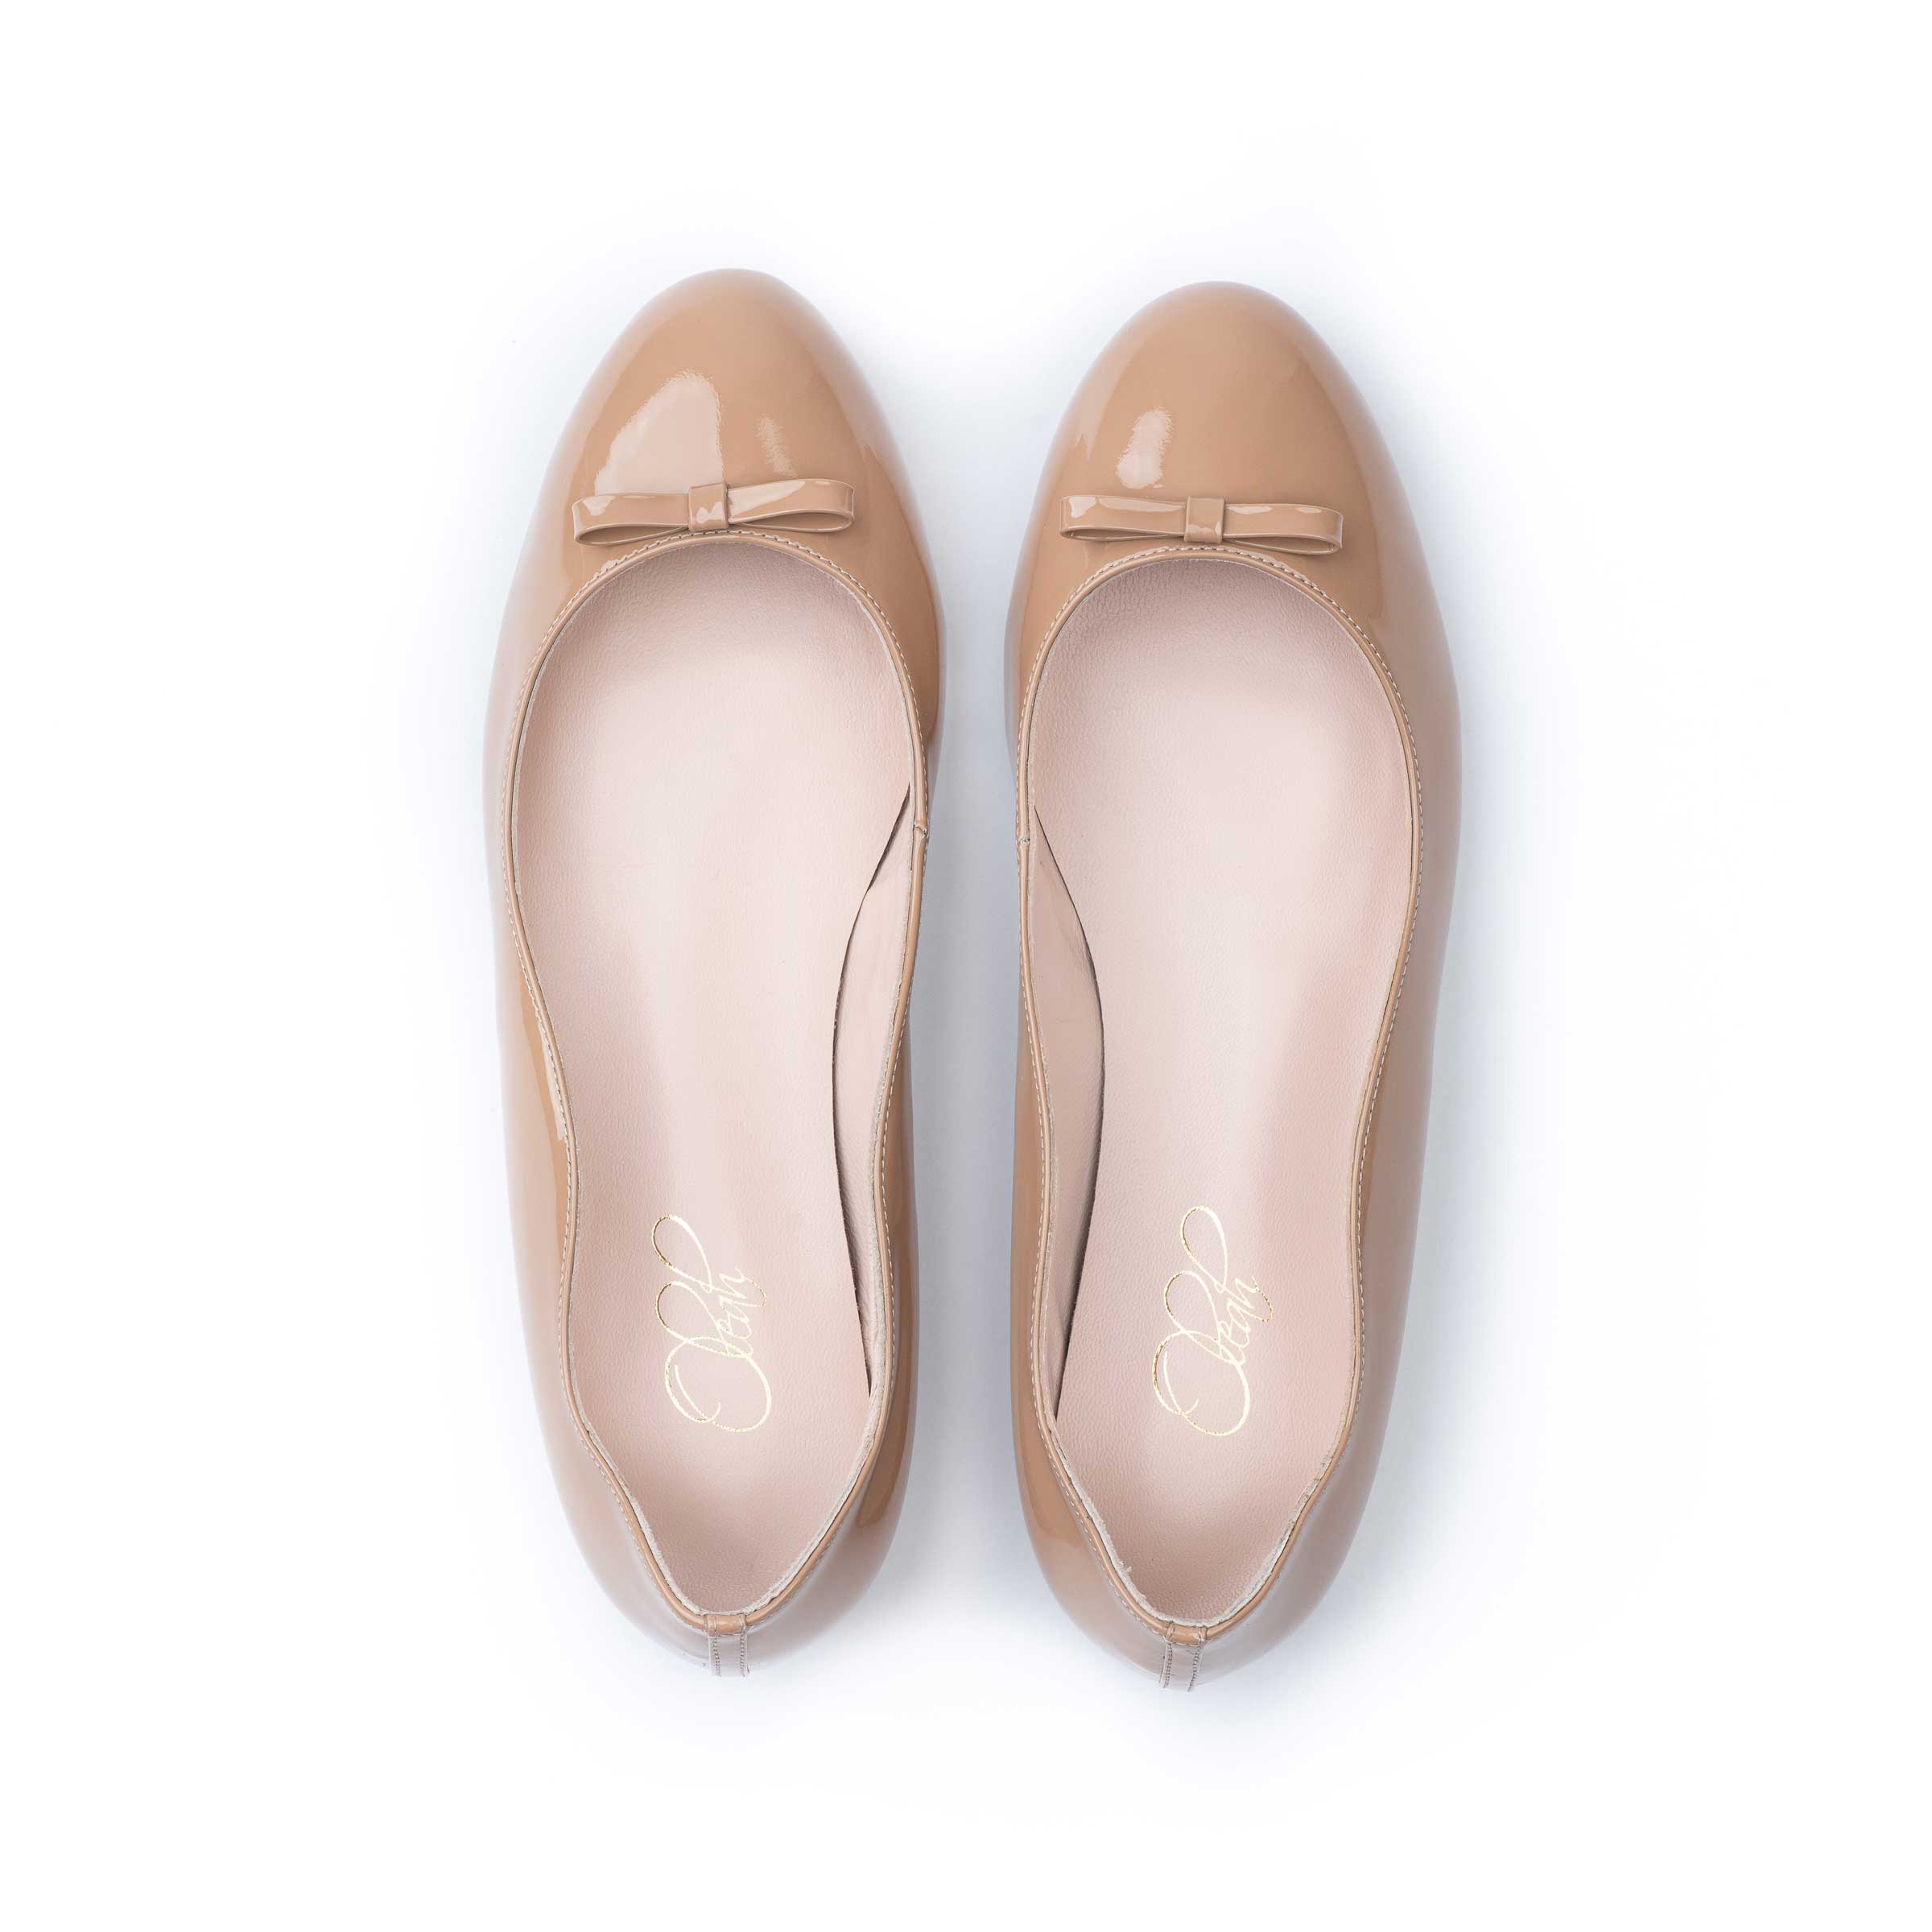 Oleah Classic Ballerina - Pecan factory outlet